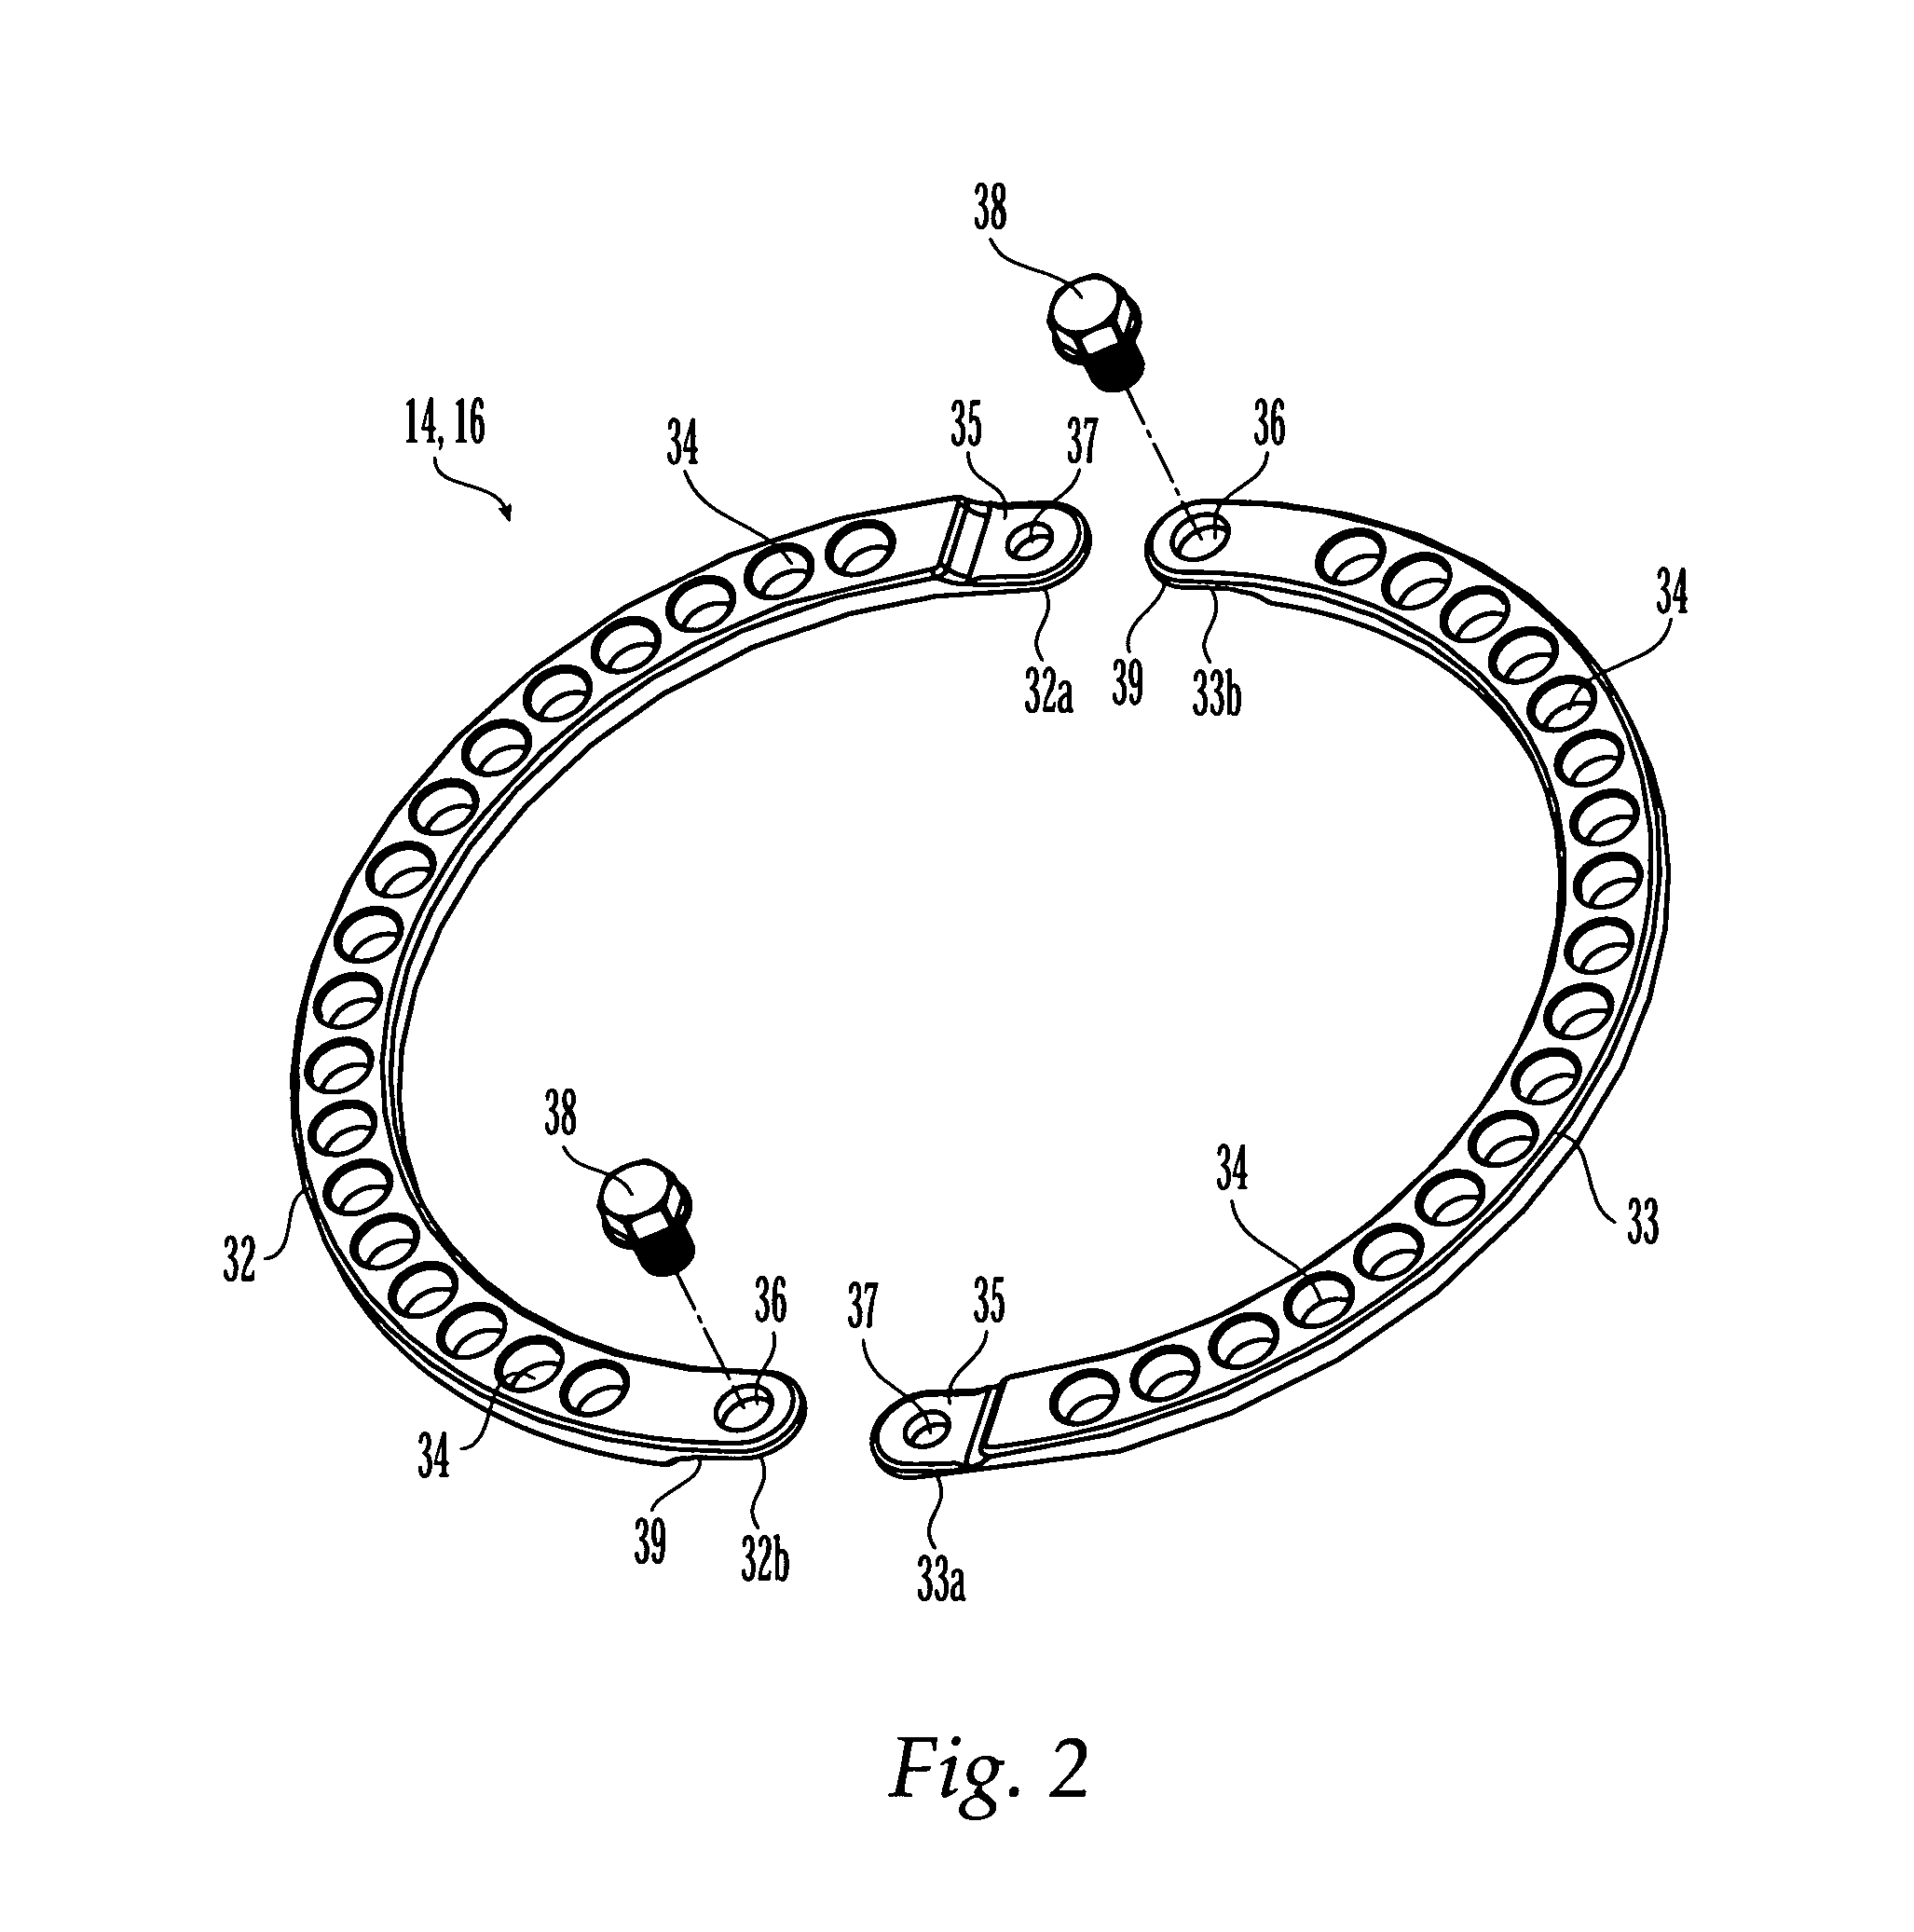 External fixation system and method of use